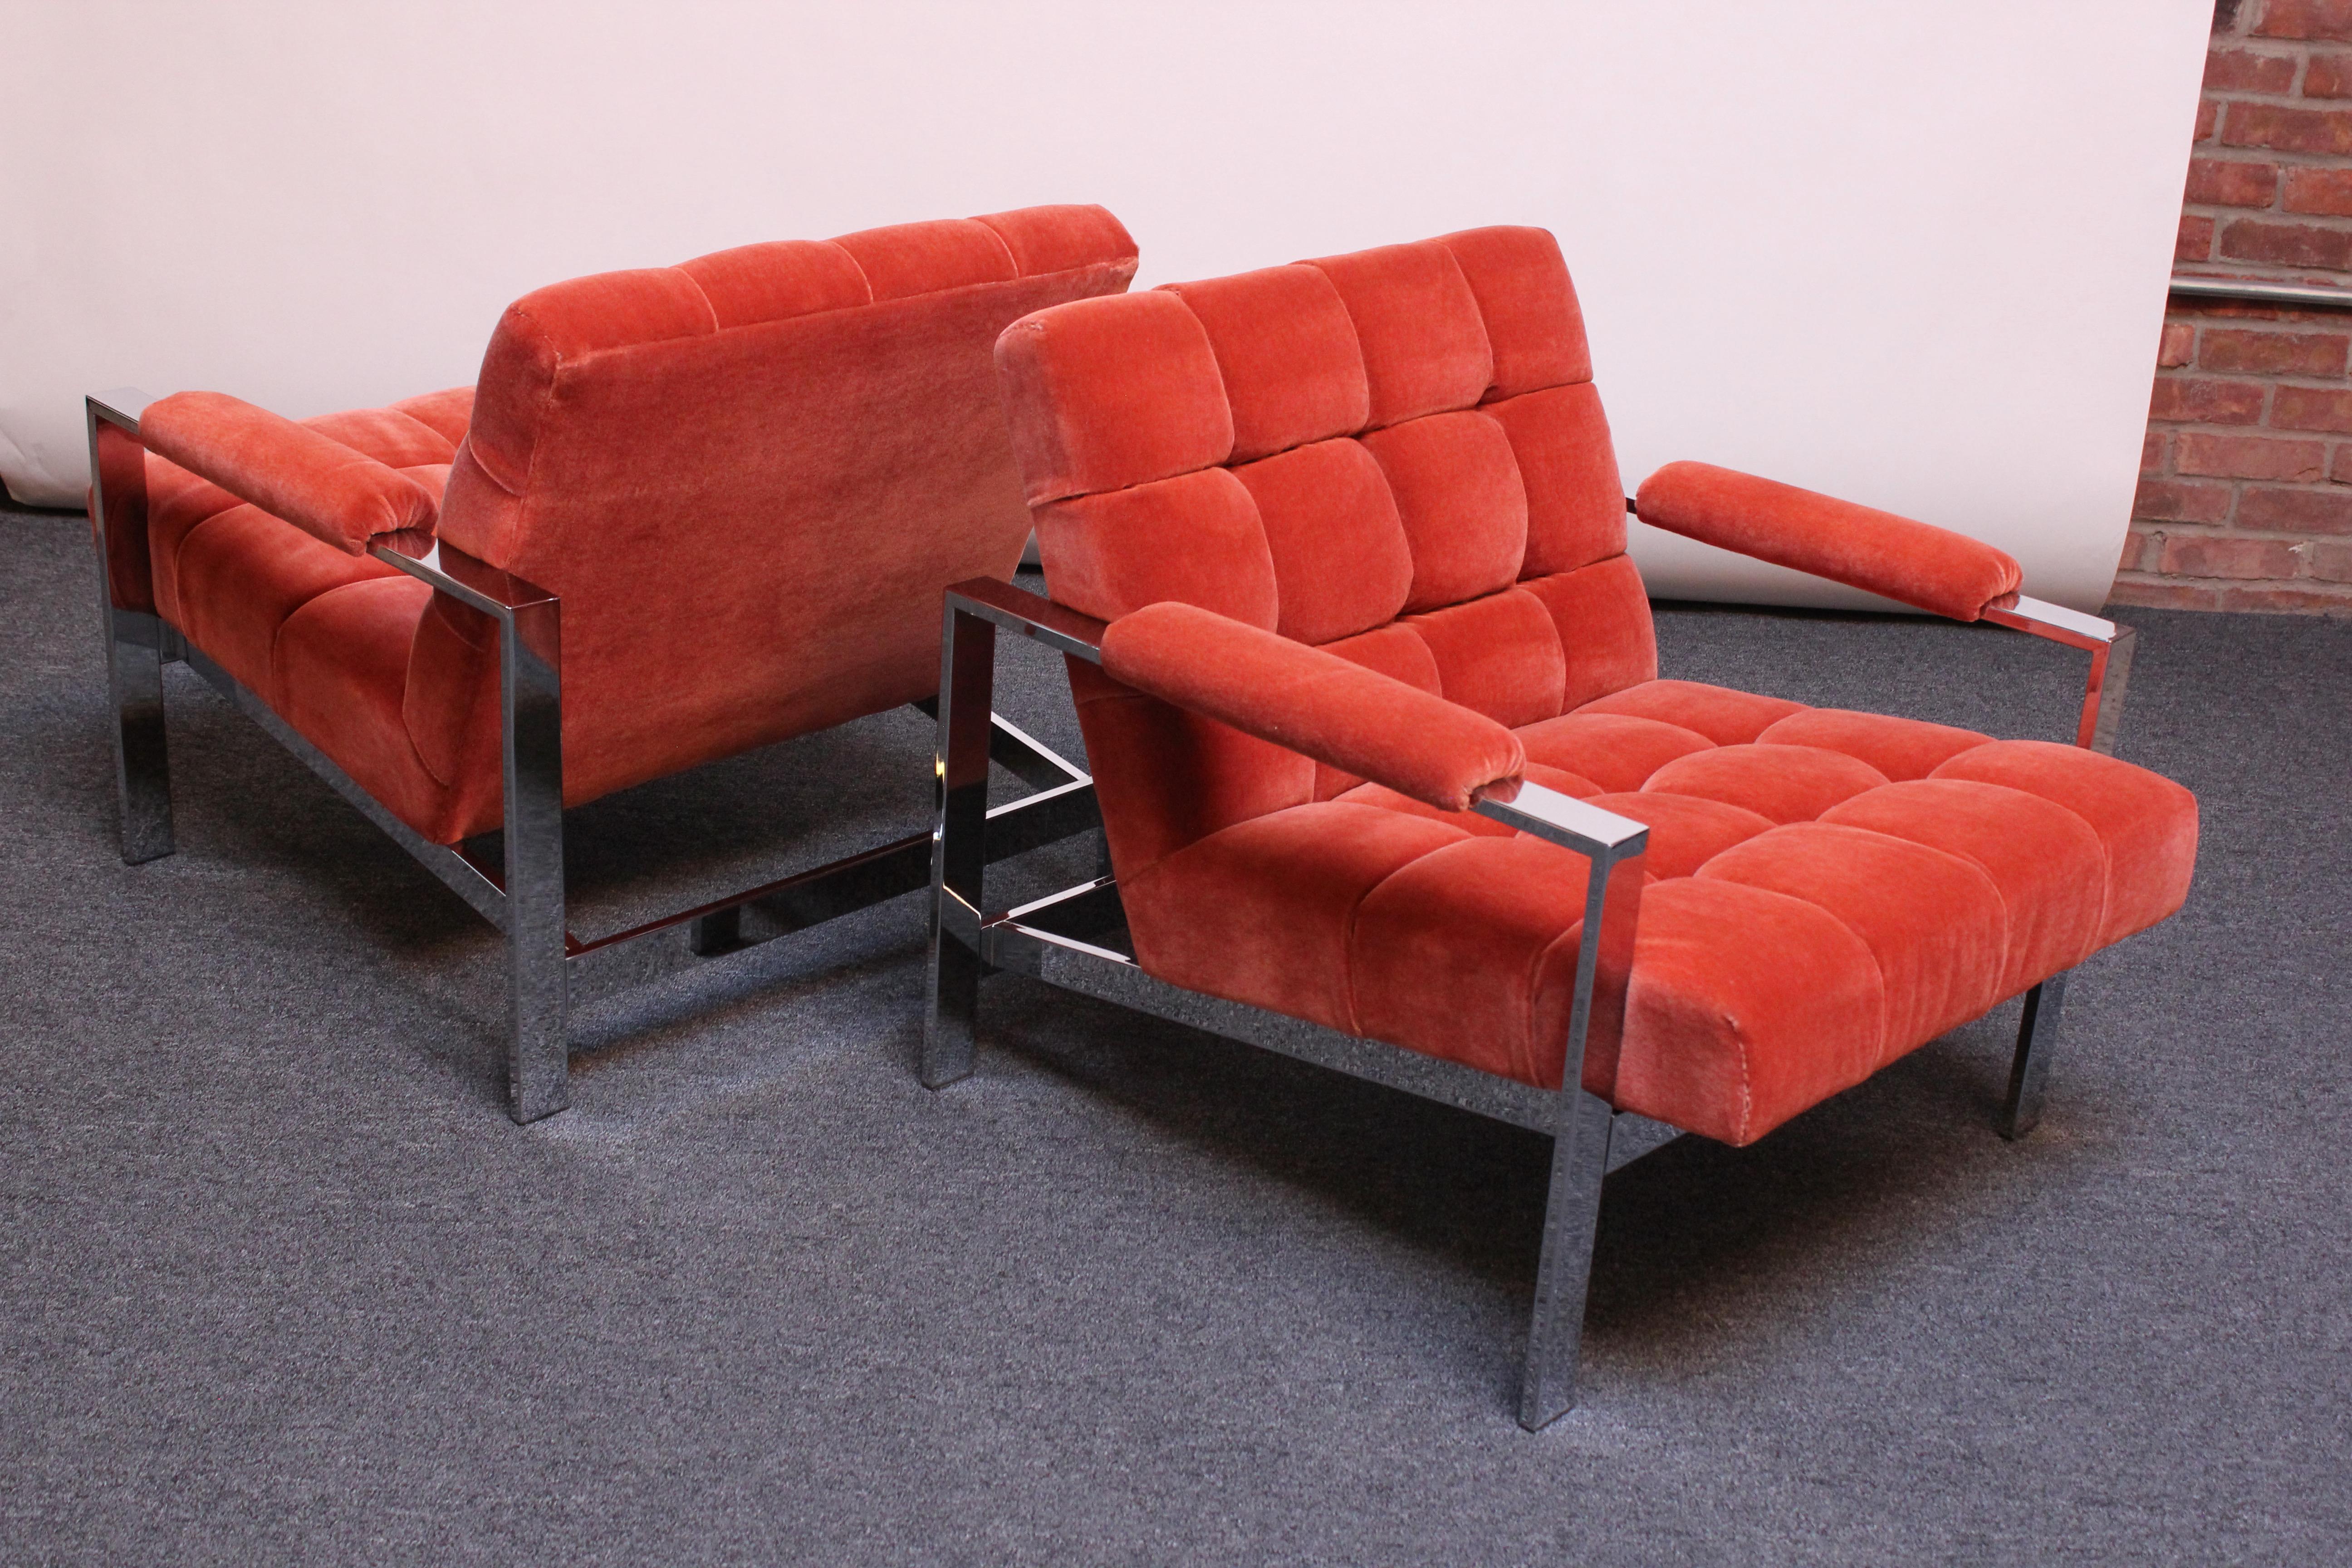 Luxurious pair of Mid-Century Modern arm chairs with polished chrome frames and tufted back and seat (reminiscent of the flat bar lounge chairs by Milo Baughman but an Italian design, as indicated by the label). 
Elegant profile with sharp, slanted